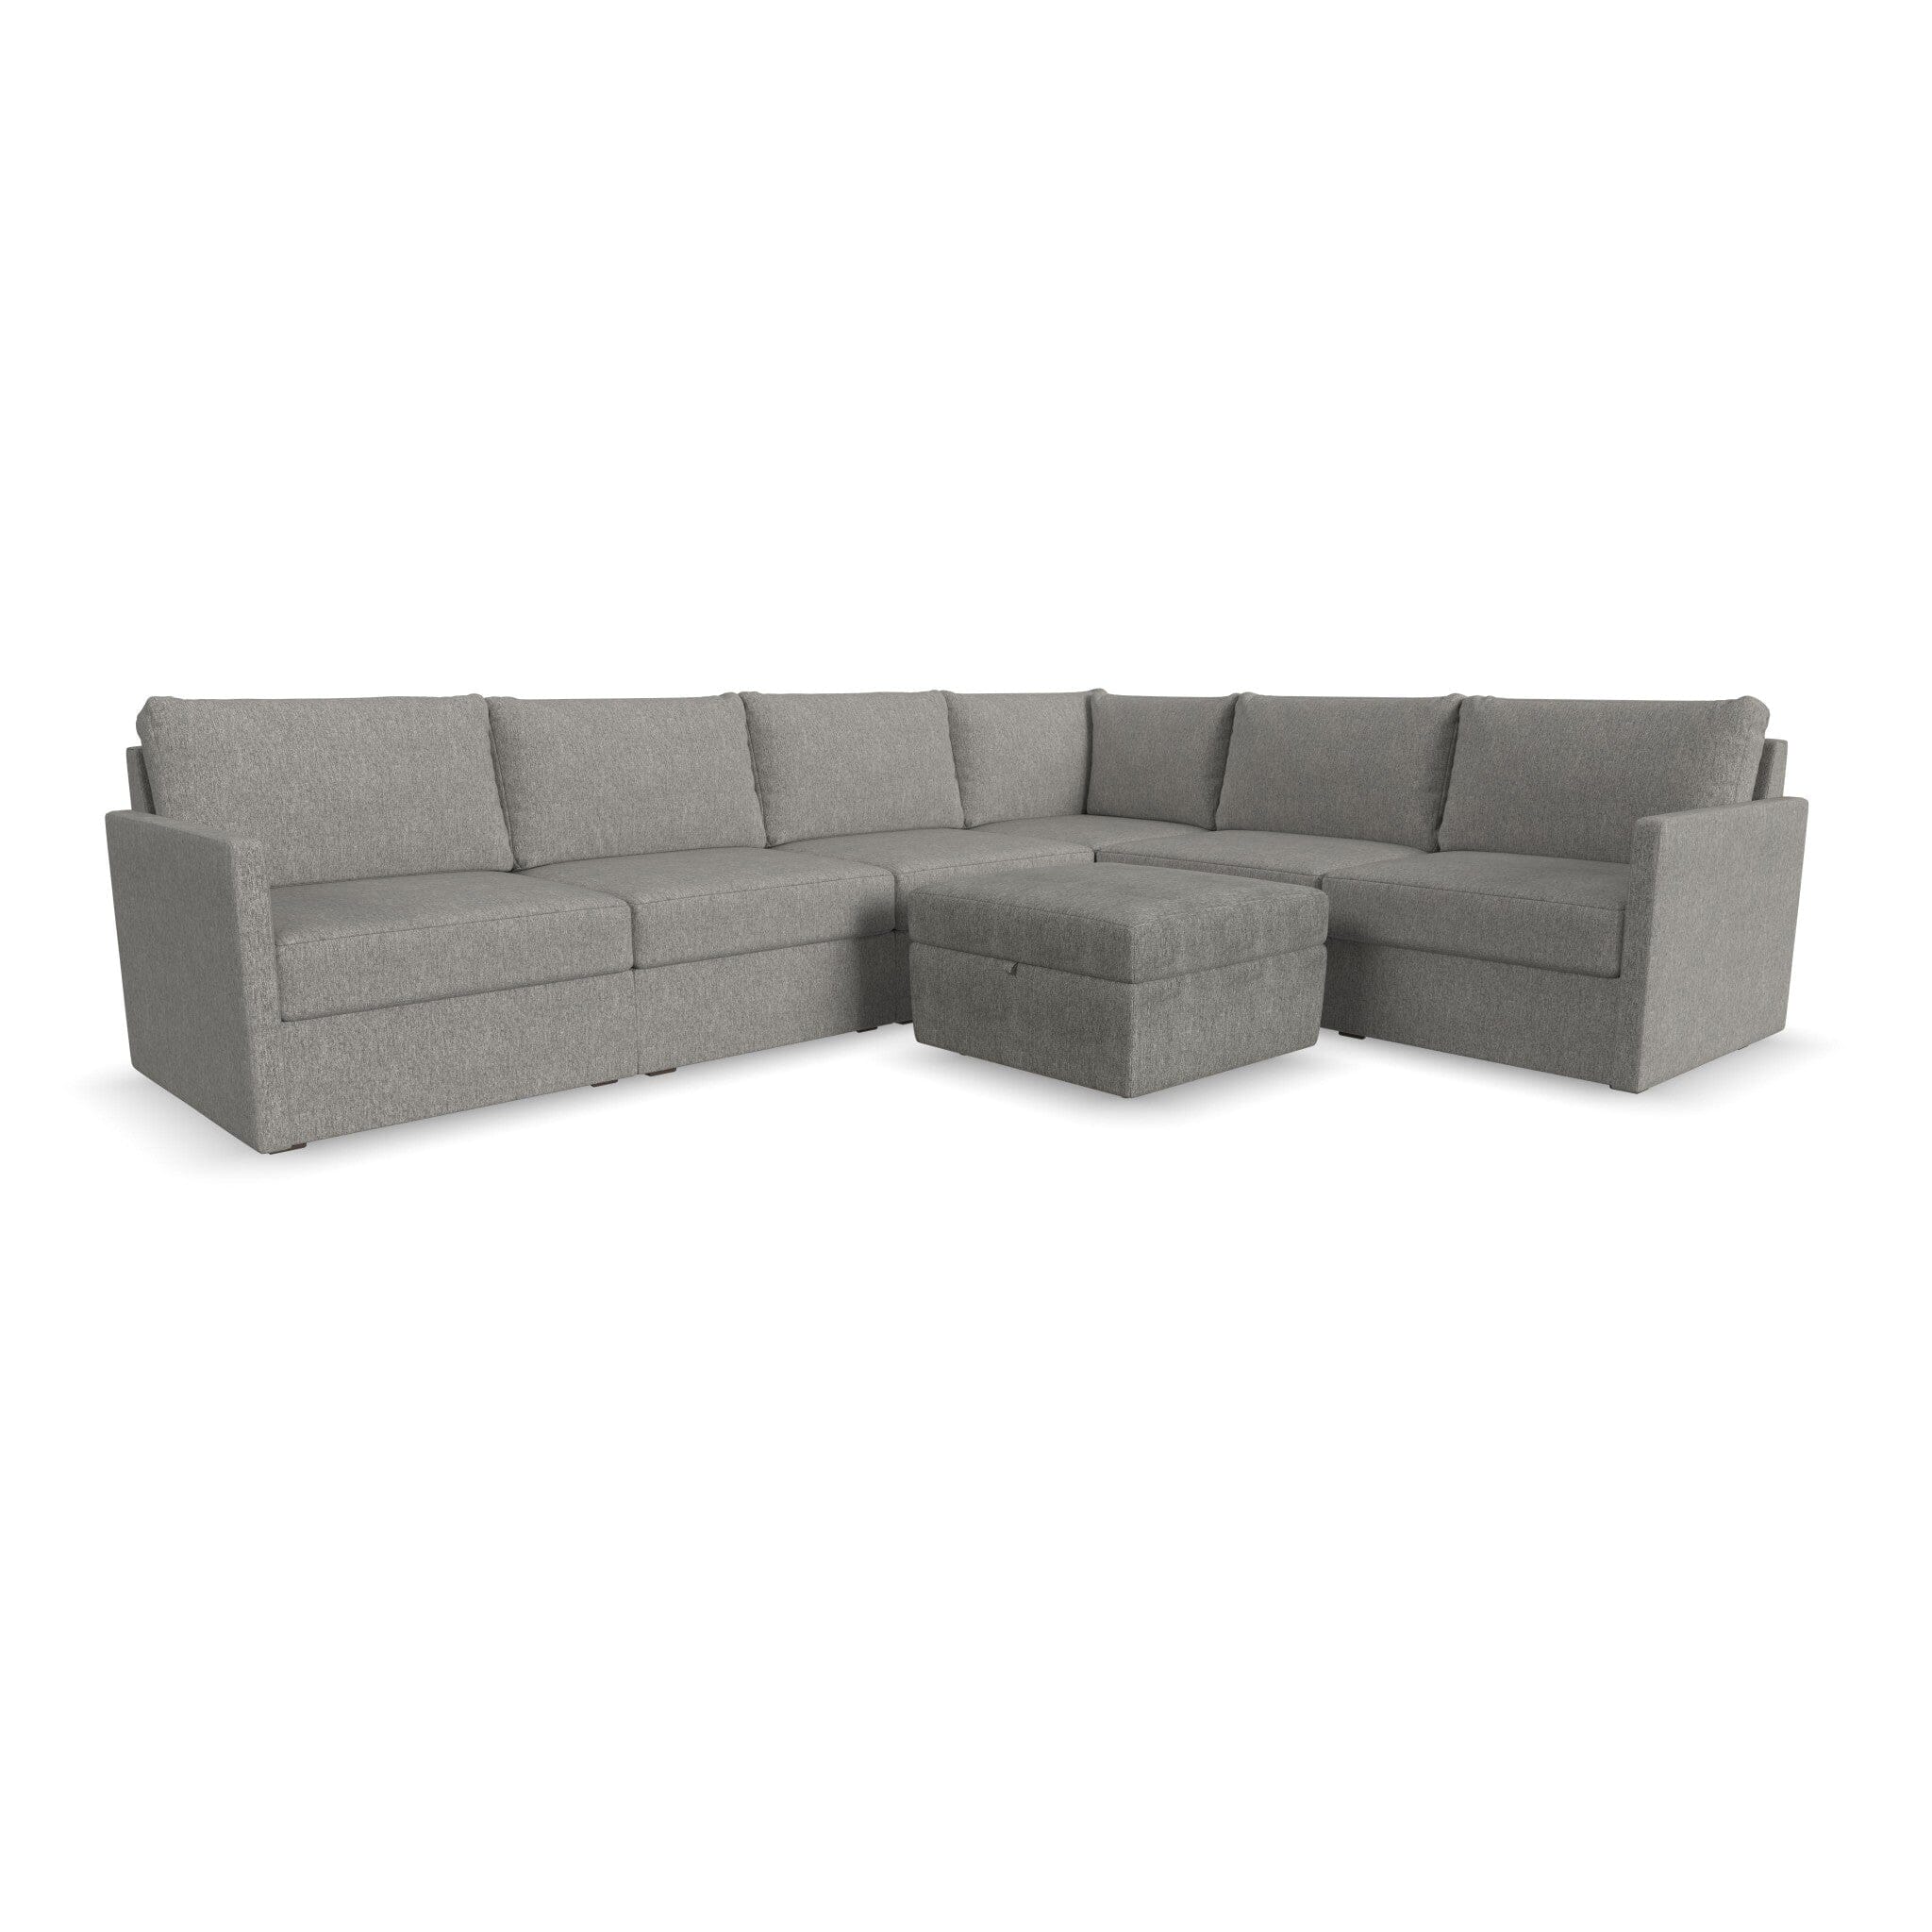 Traditional 6-Seat Sectional with Narrow Arm and Storage Ottoman By Flex Sectional Flex